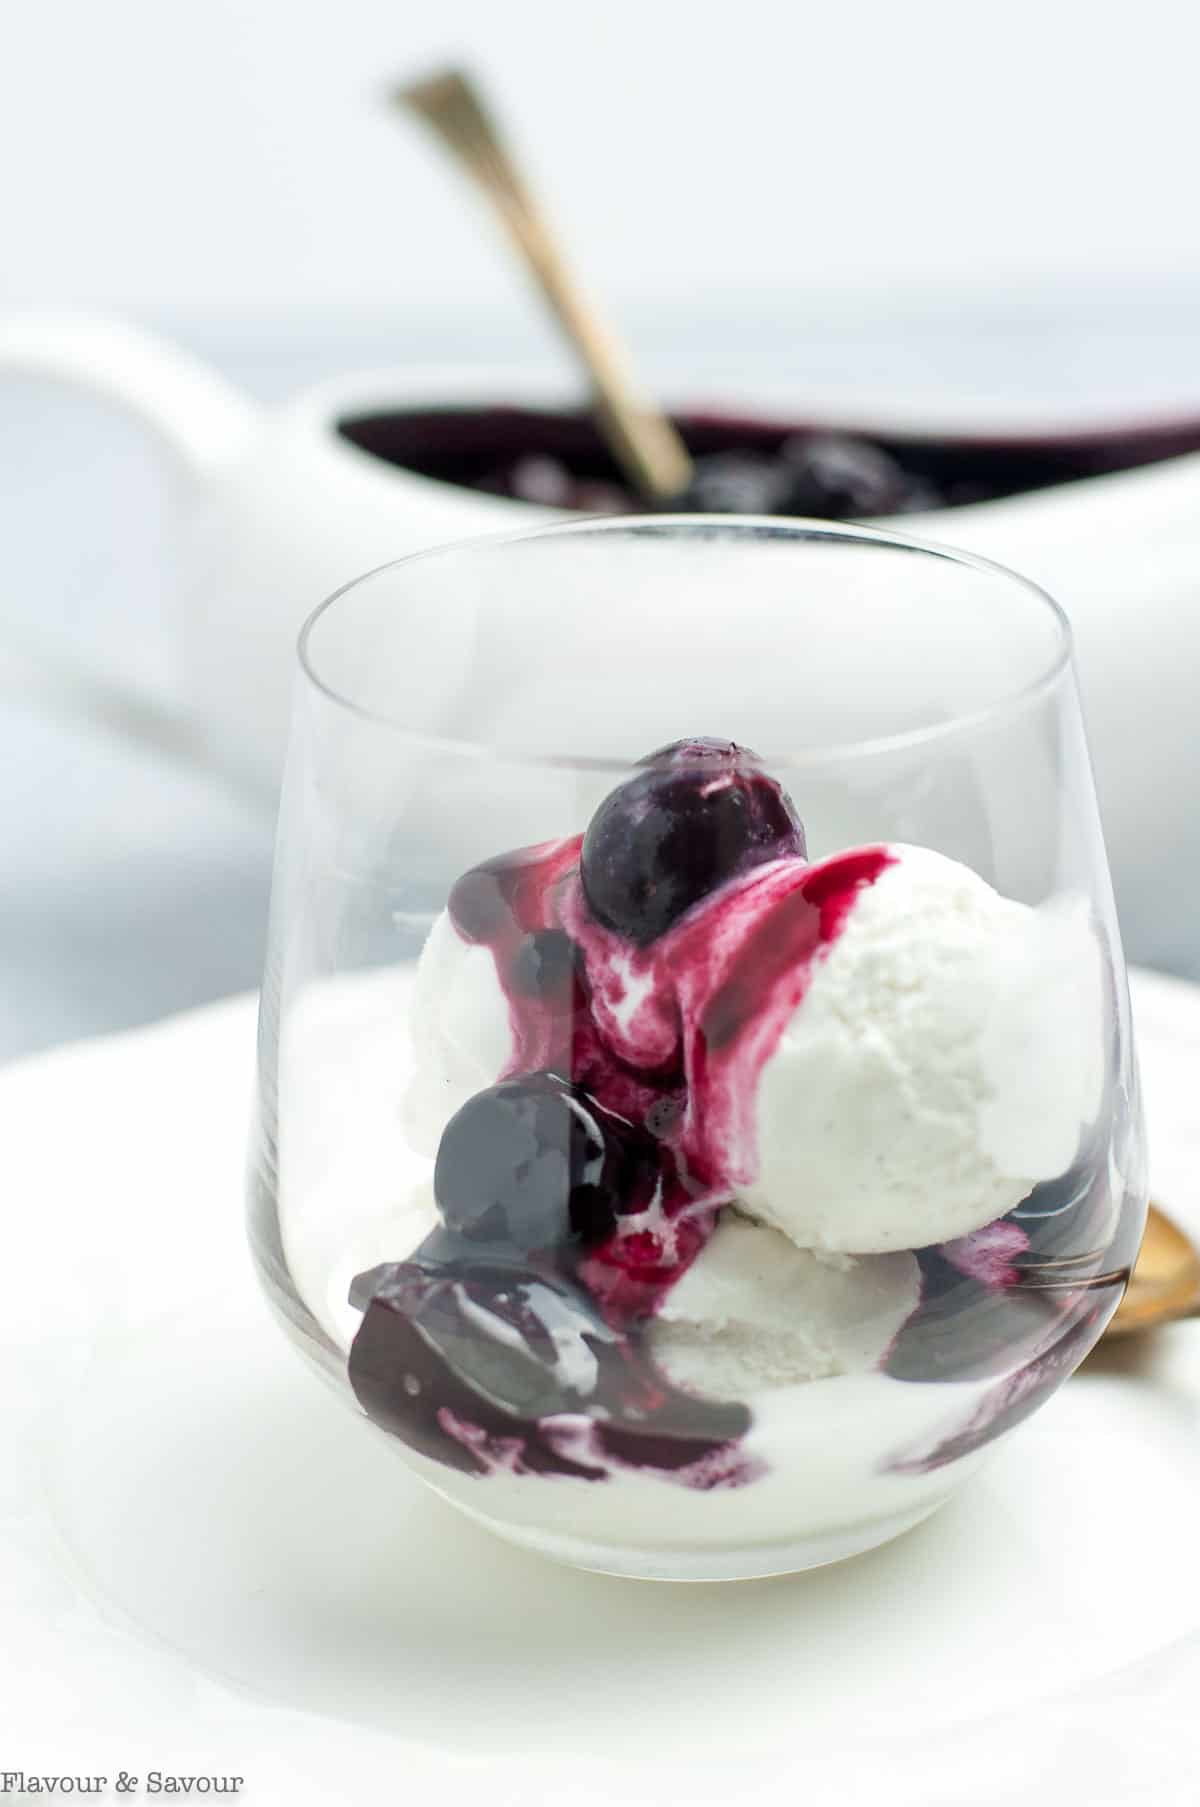 A glass of vanilla ice cream topped with cherry compote or cherry sauce.